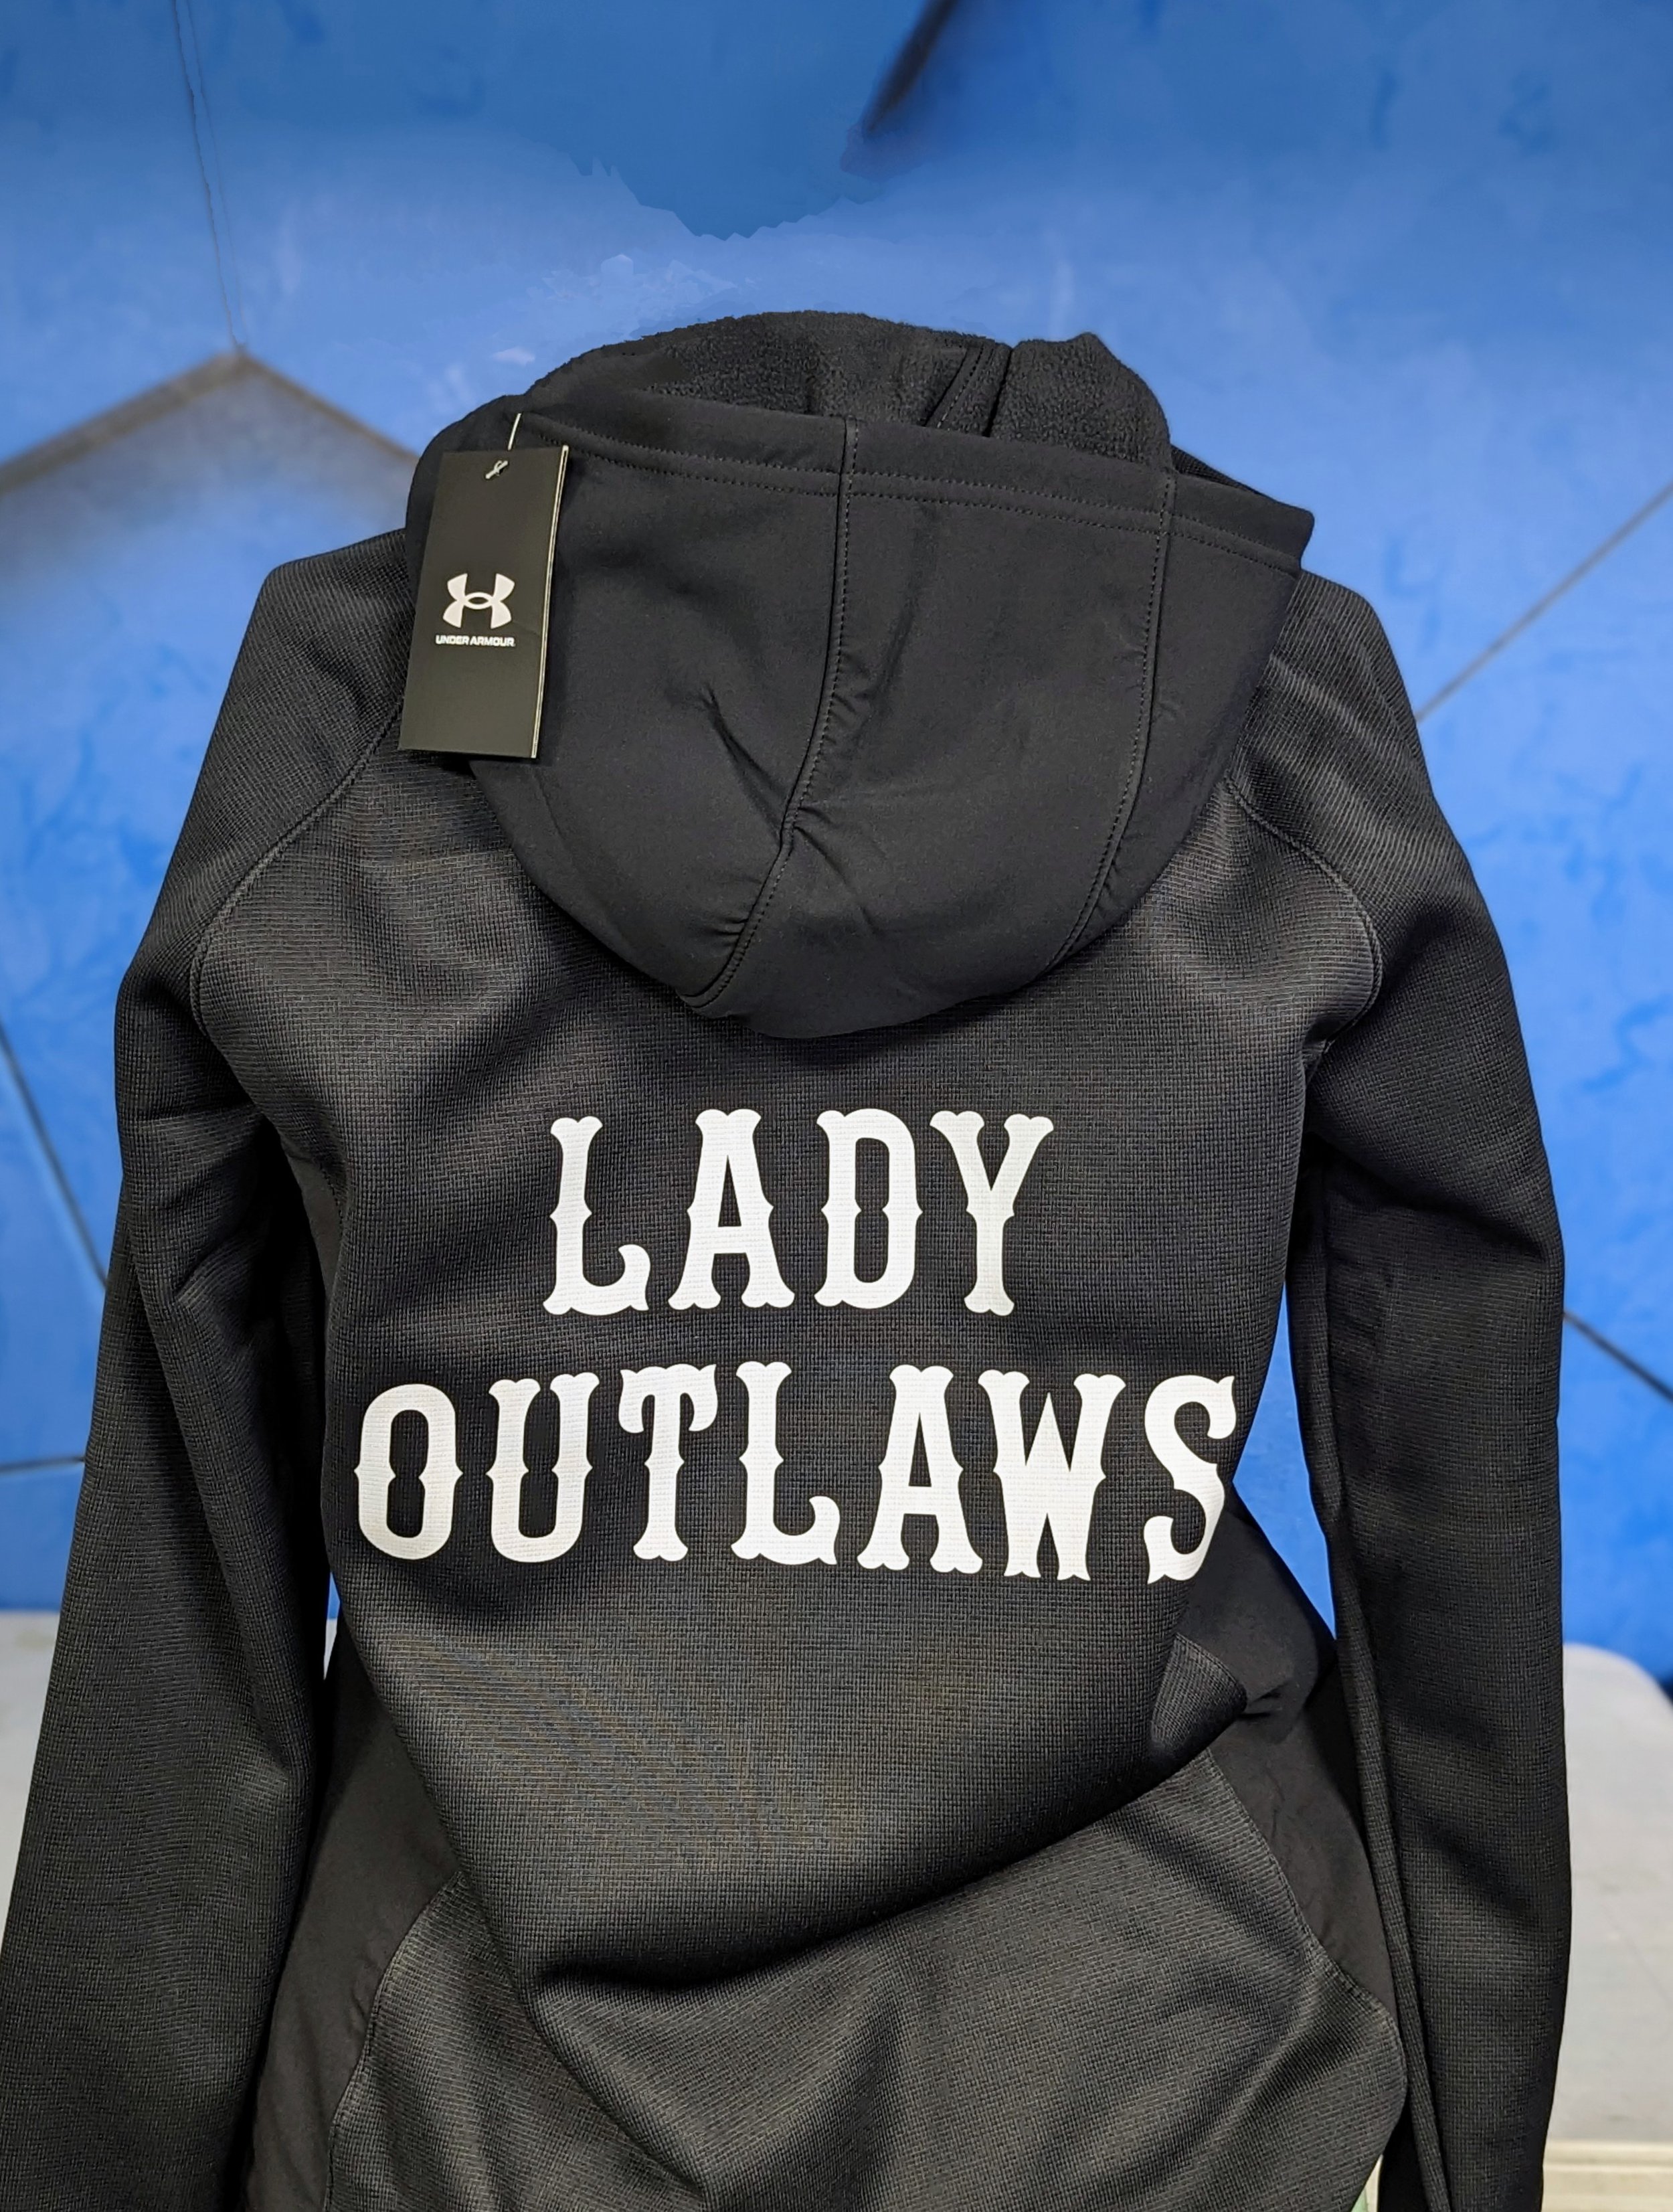 Lady Outlaws jackets Back.jpg